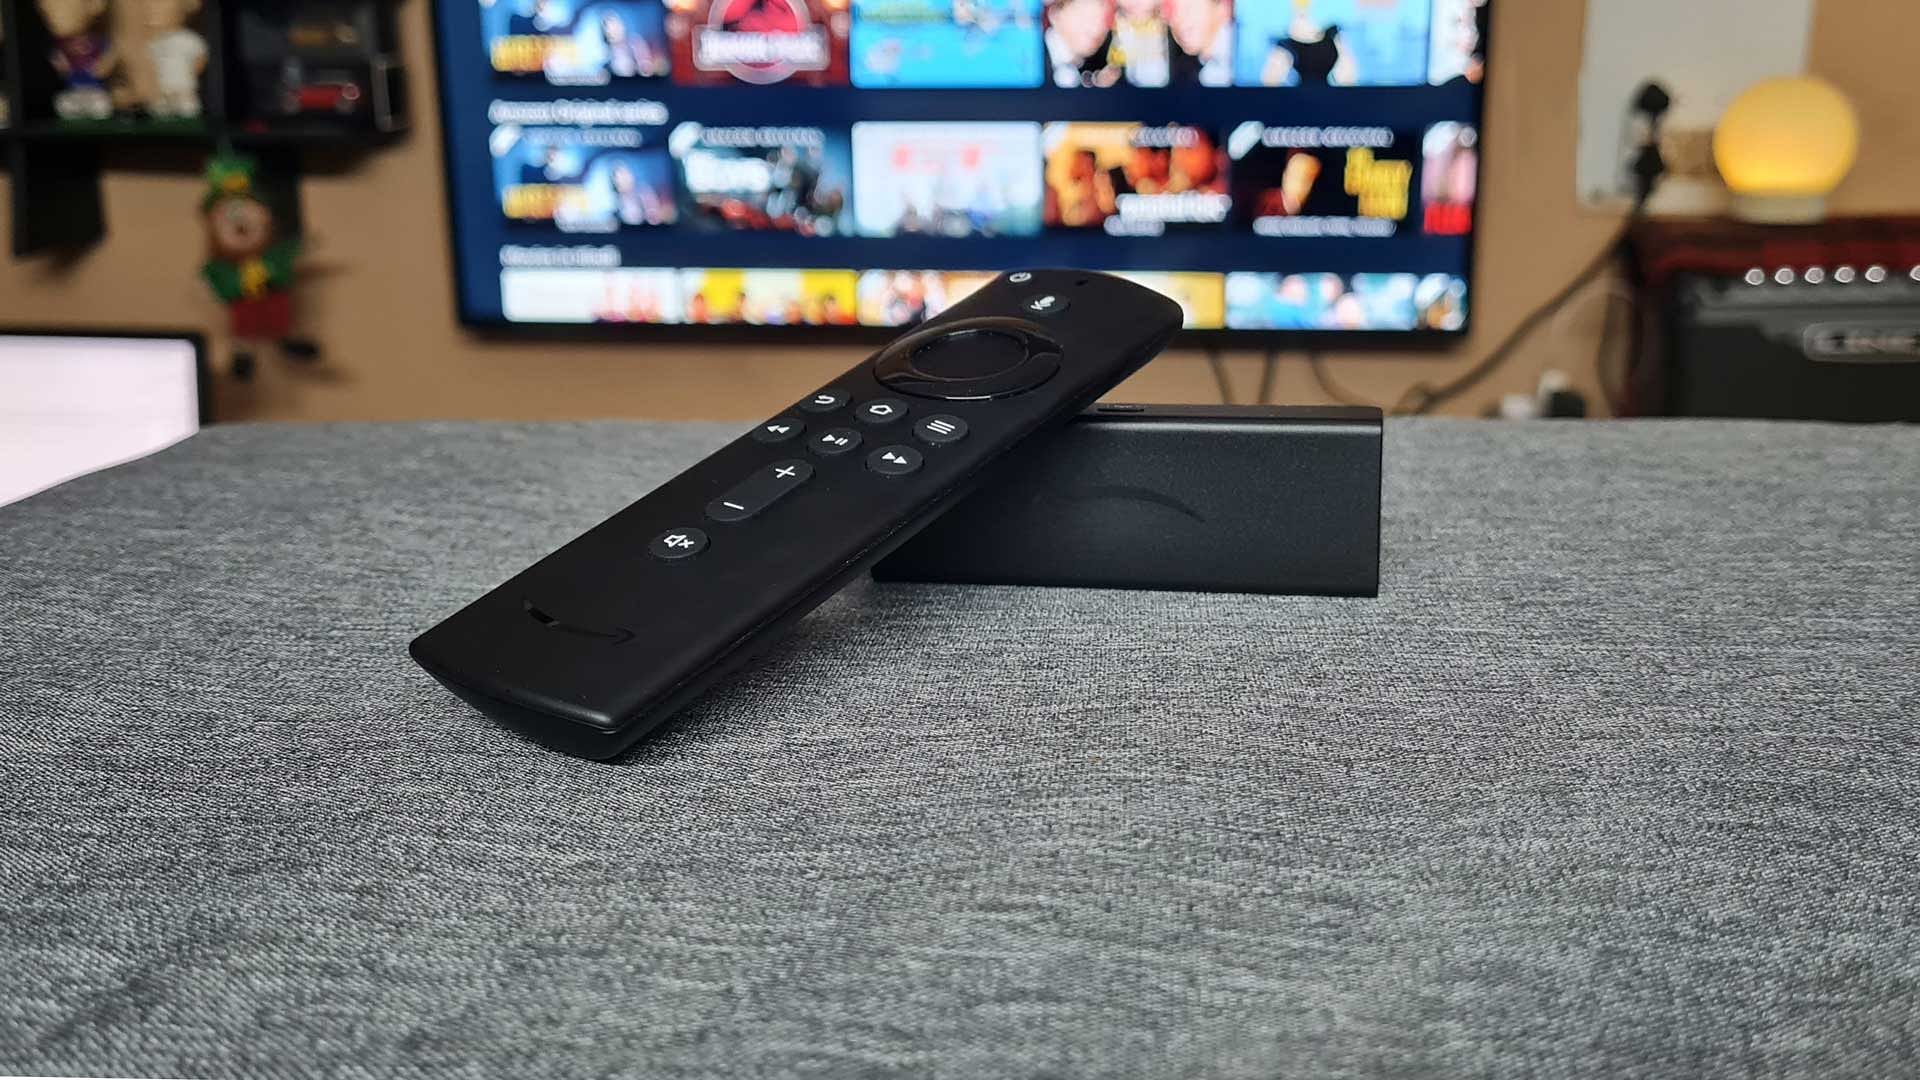 The new Amazon Fire TV Stick comes with Alexa voice assistant features.&nbsp;